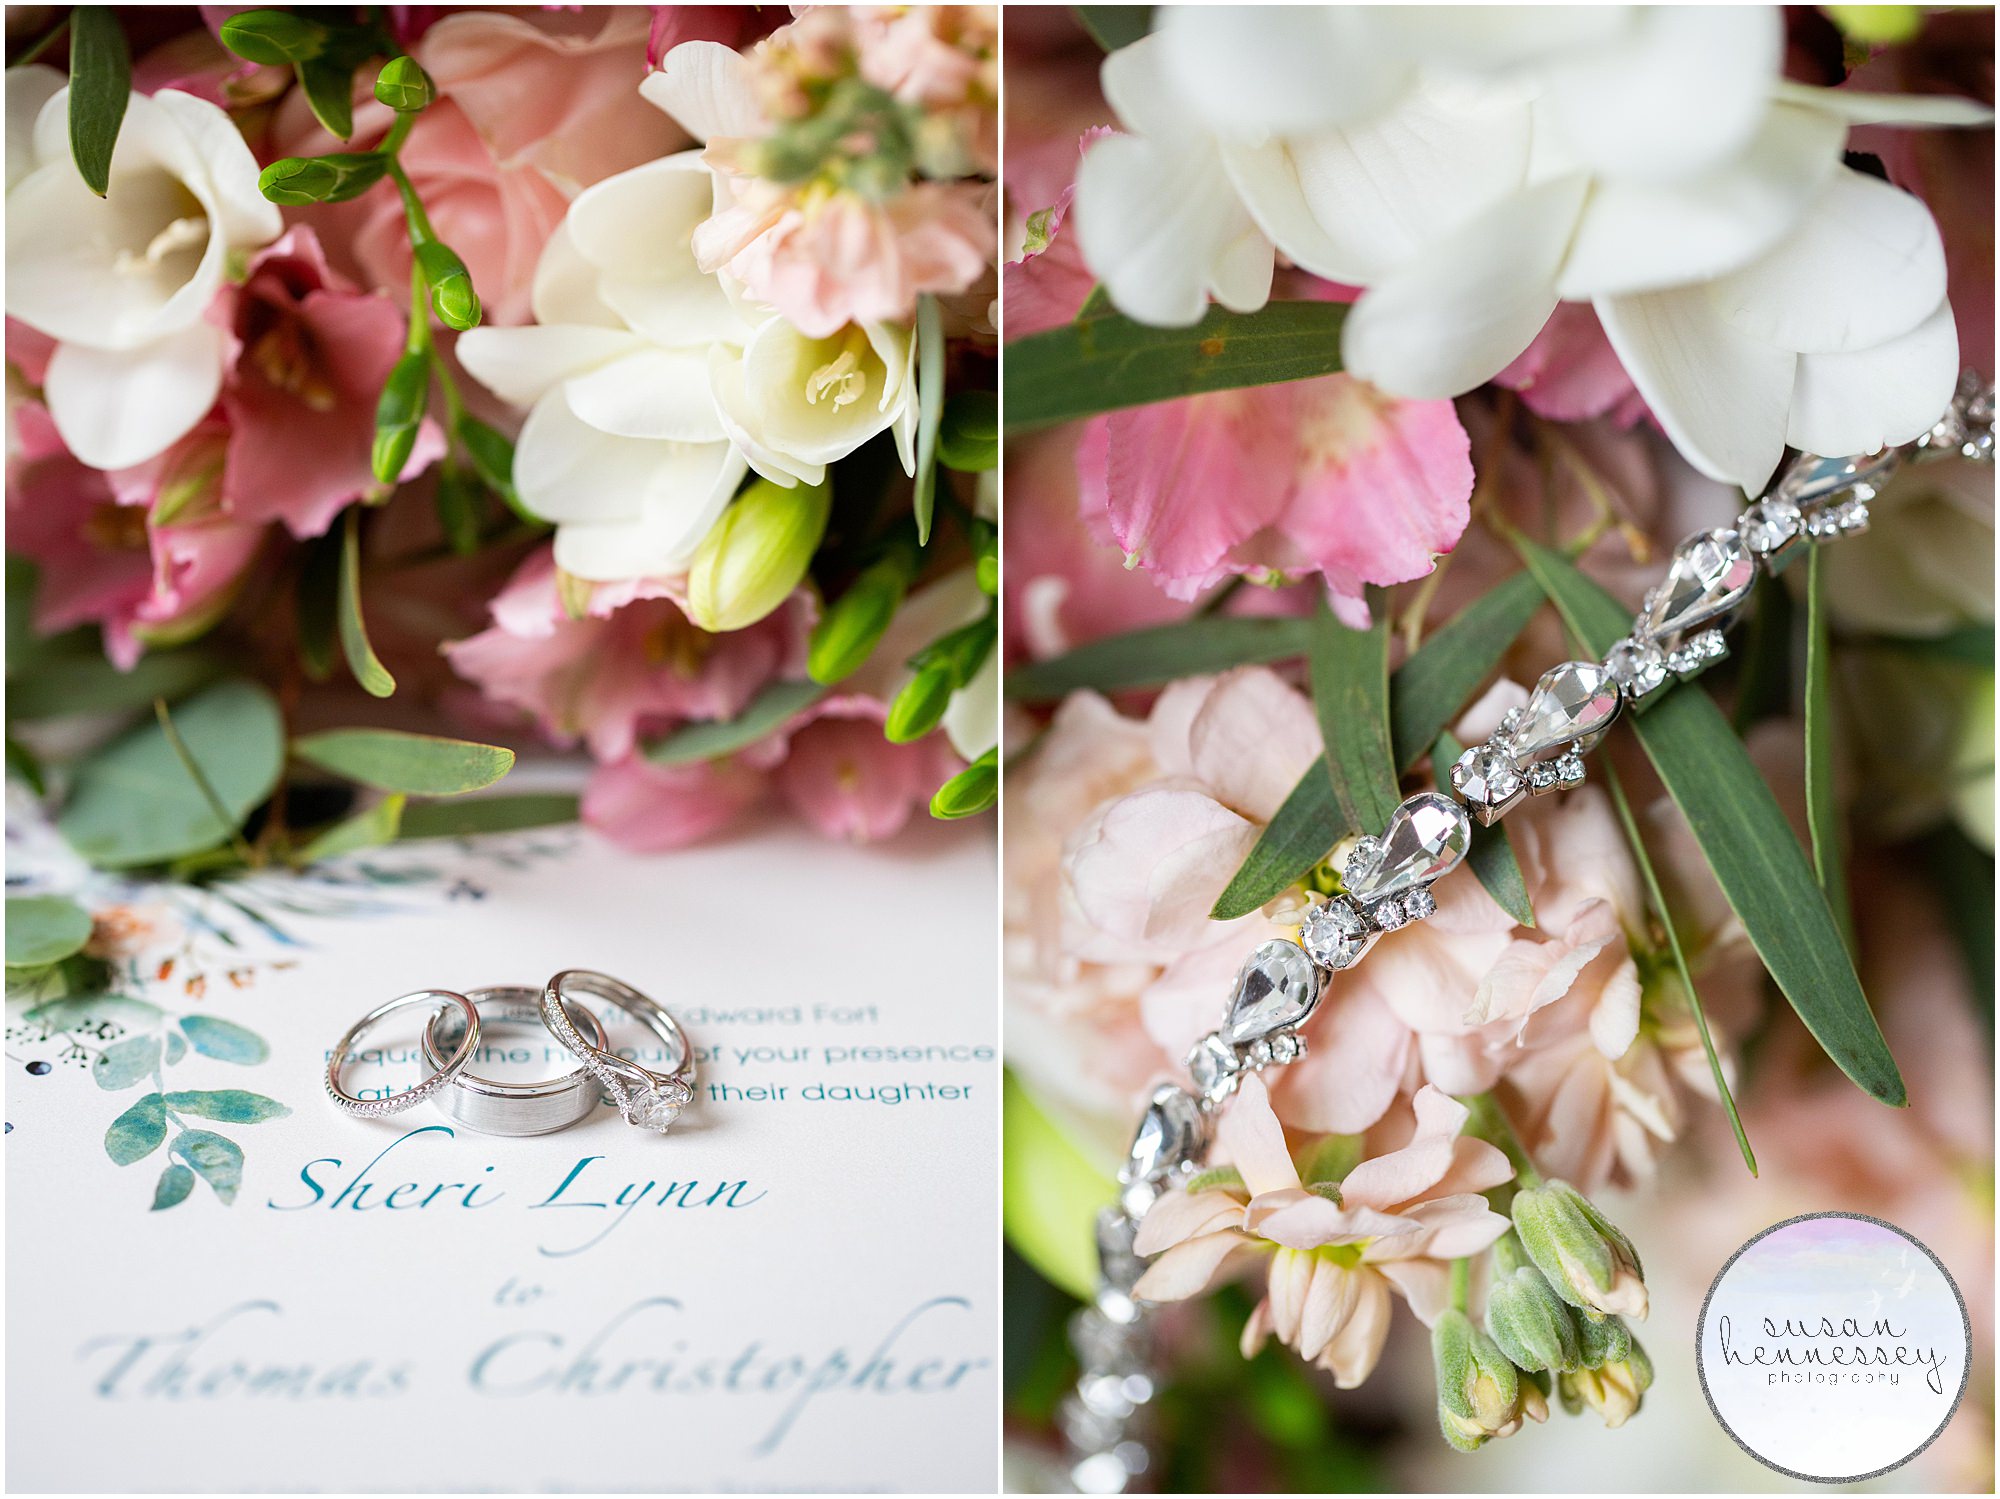 detail photo of wedding invitation with wedding rings, bouquet and bride's bracelet.